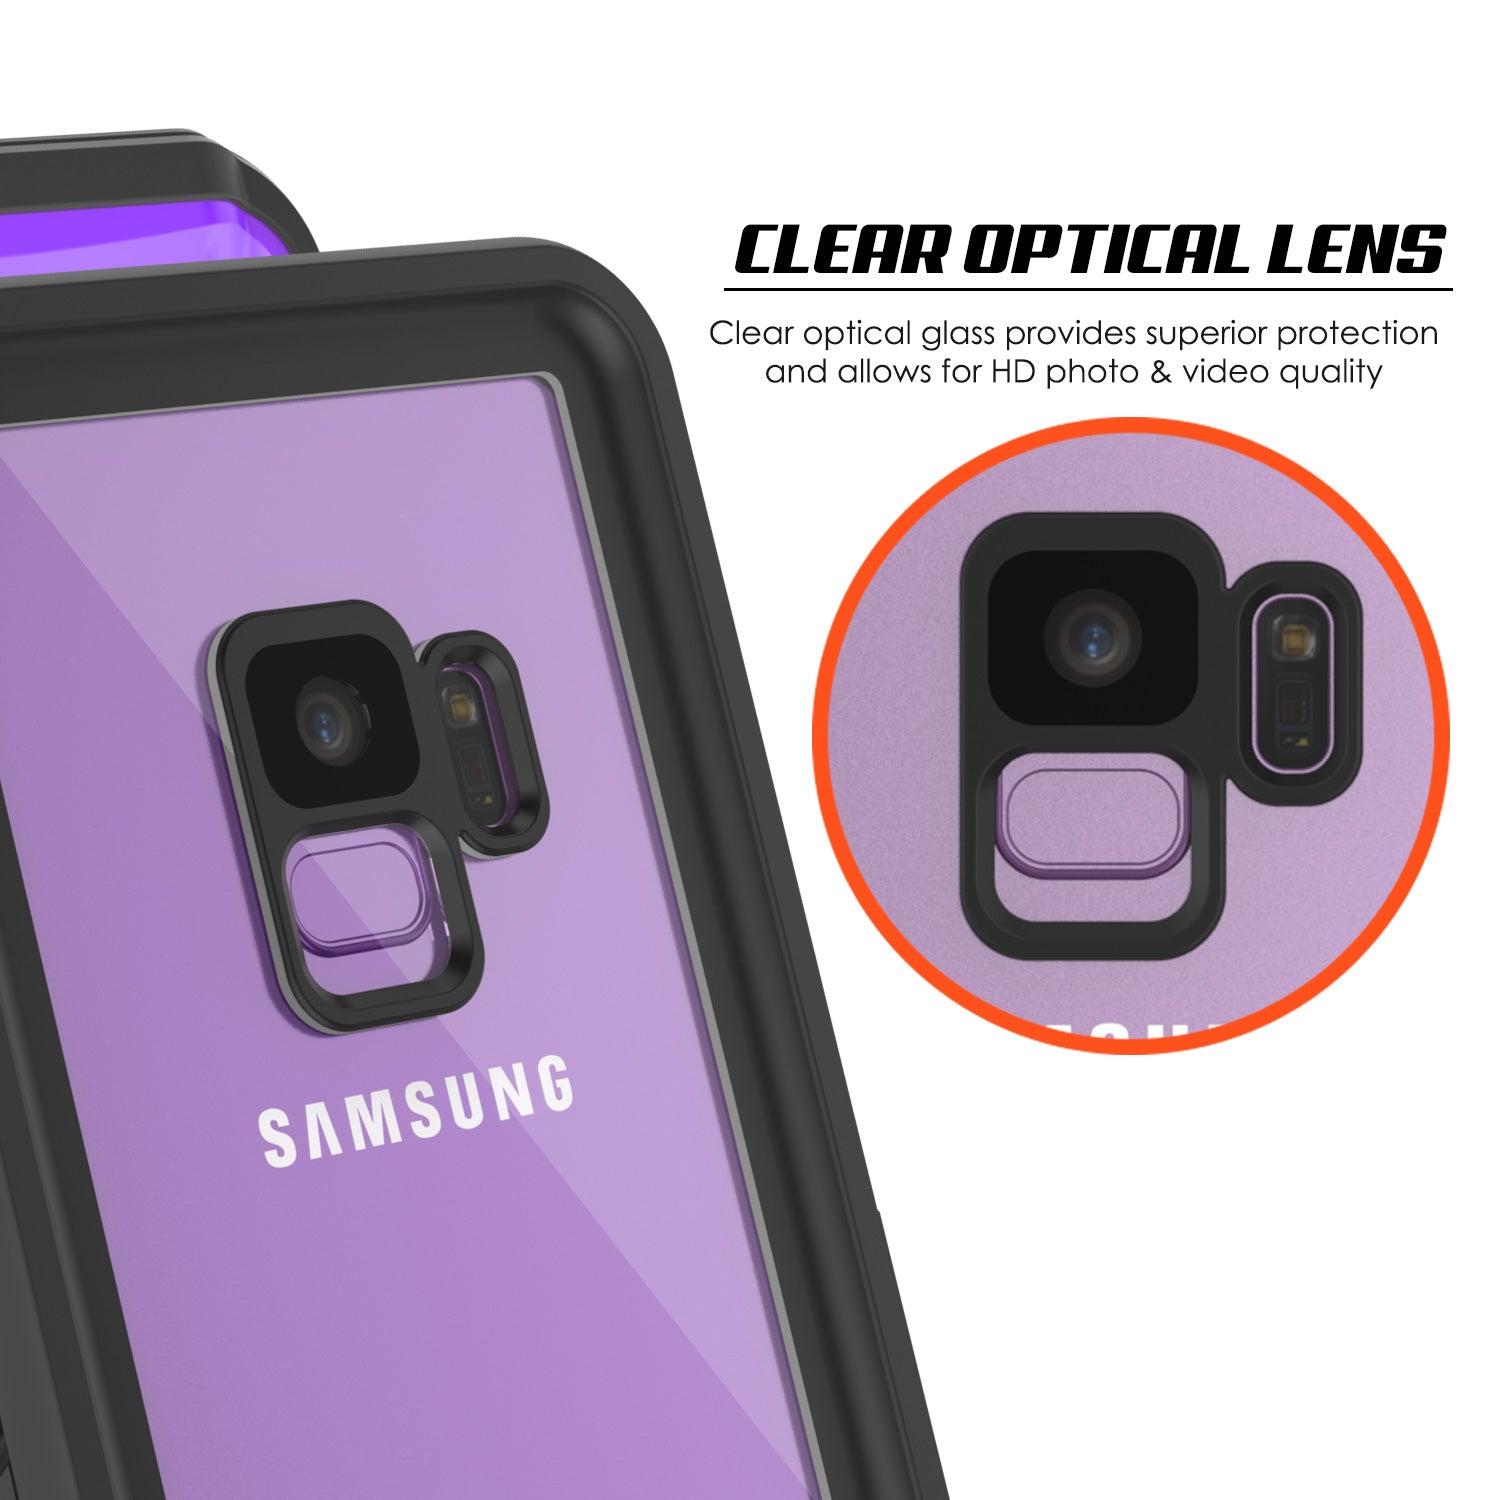 Galaxy S9 Waterproof Case, Punkcase [Extreme Series] [Slim Fit] [IP68 Certified] [Shockproof] [Snowproof] [Dirproof] Armor Cover W/ Built In Screen Protector for Samsung Galaxy S9 [Purple] - PunkCase NZ